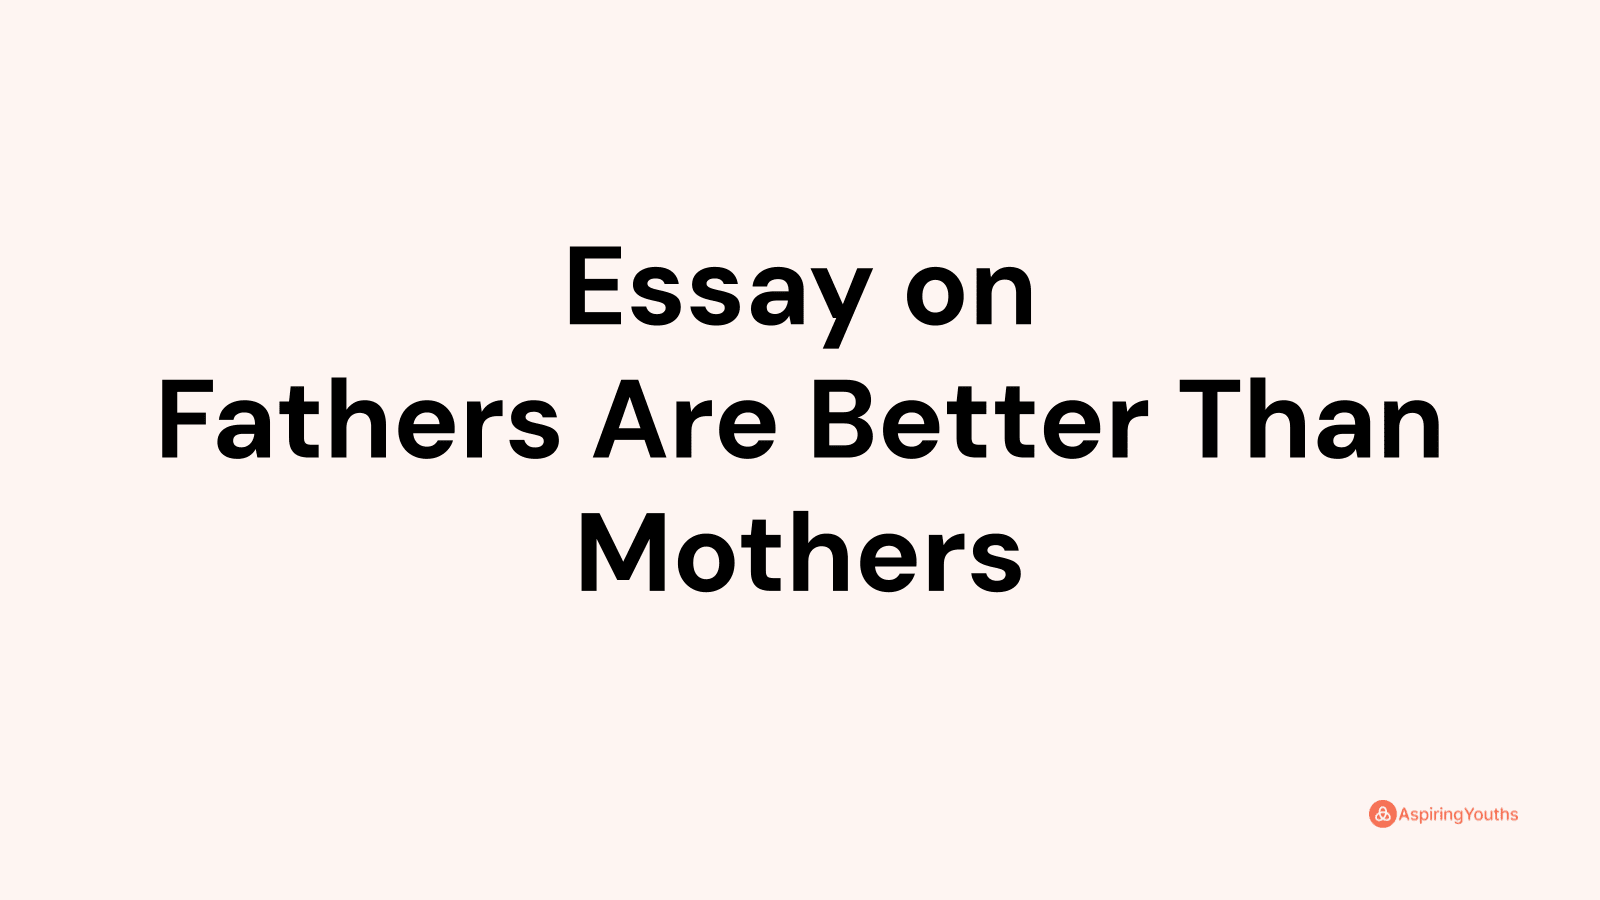 write an argumentative essay on the topic fathers are better than mothers